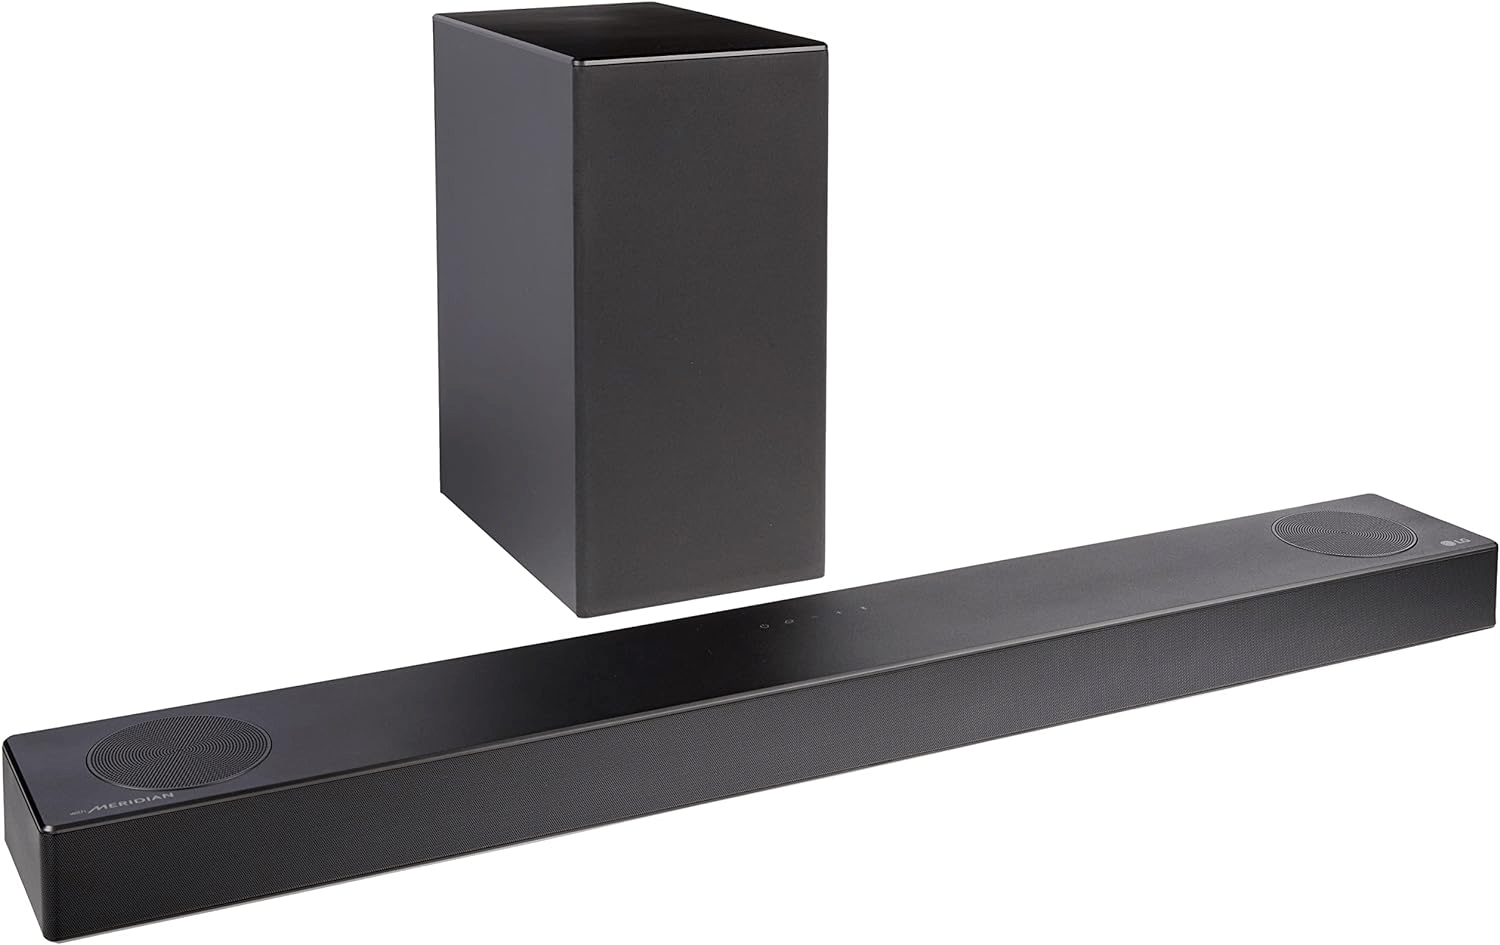 Soundbar Deals - LG S75Q 3.1.2ch Sound bar with Dolby Atmos DTS:X, High-Res Audio, Synergy TV, Meridian, HDMI eARC, 4K Pass Thru with Dolby Vision Black